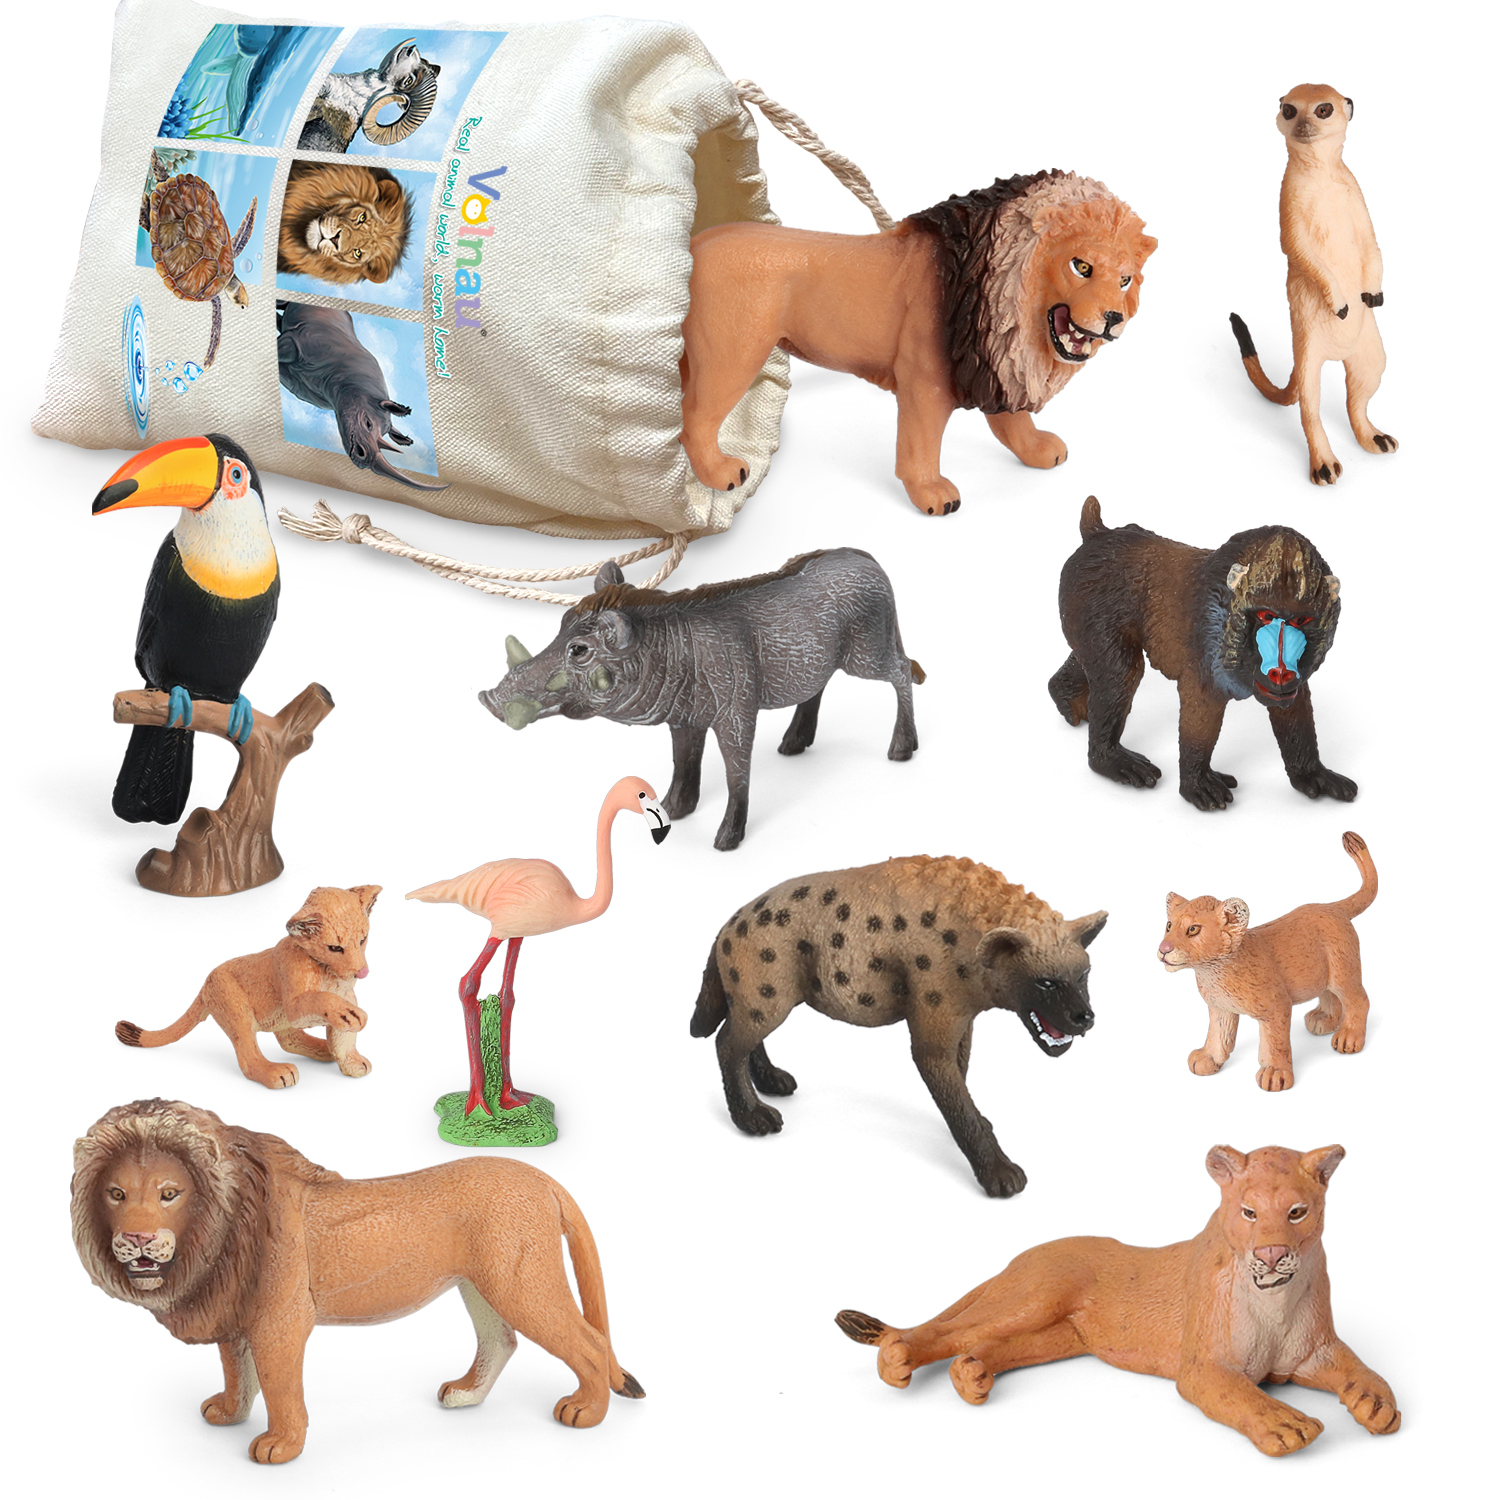 Volnau 11 Pcs Africa Lion King Animal Toys Figurines Animals Figures Zoo  Pack for Kids Christmas Birthday Gift Preschool Educational and Lion Jungle  Forest King Animals Sets